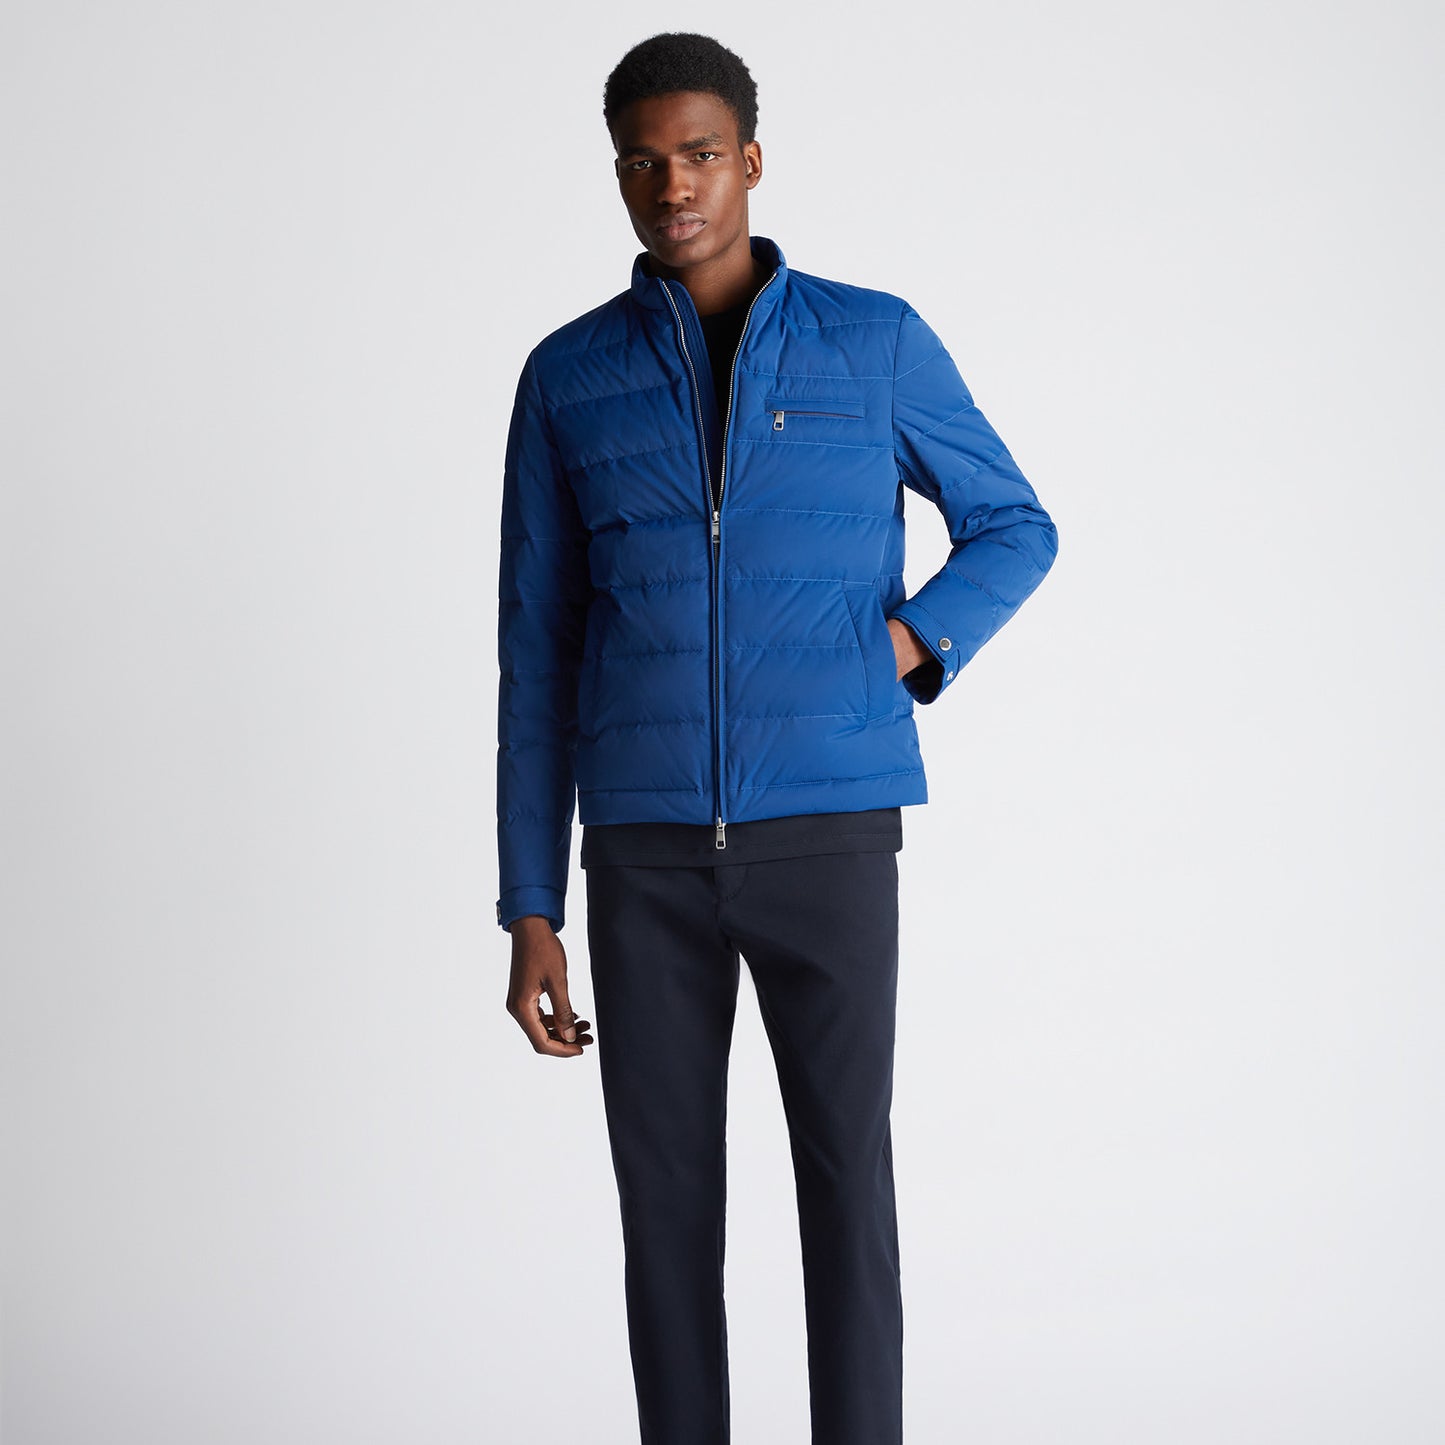 Remus Uomo 80480 26 Blue Quilted Jacket